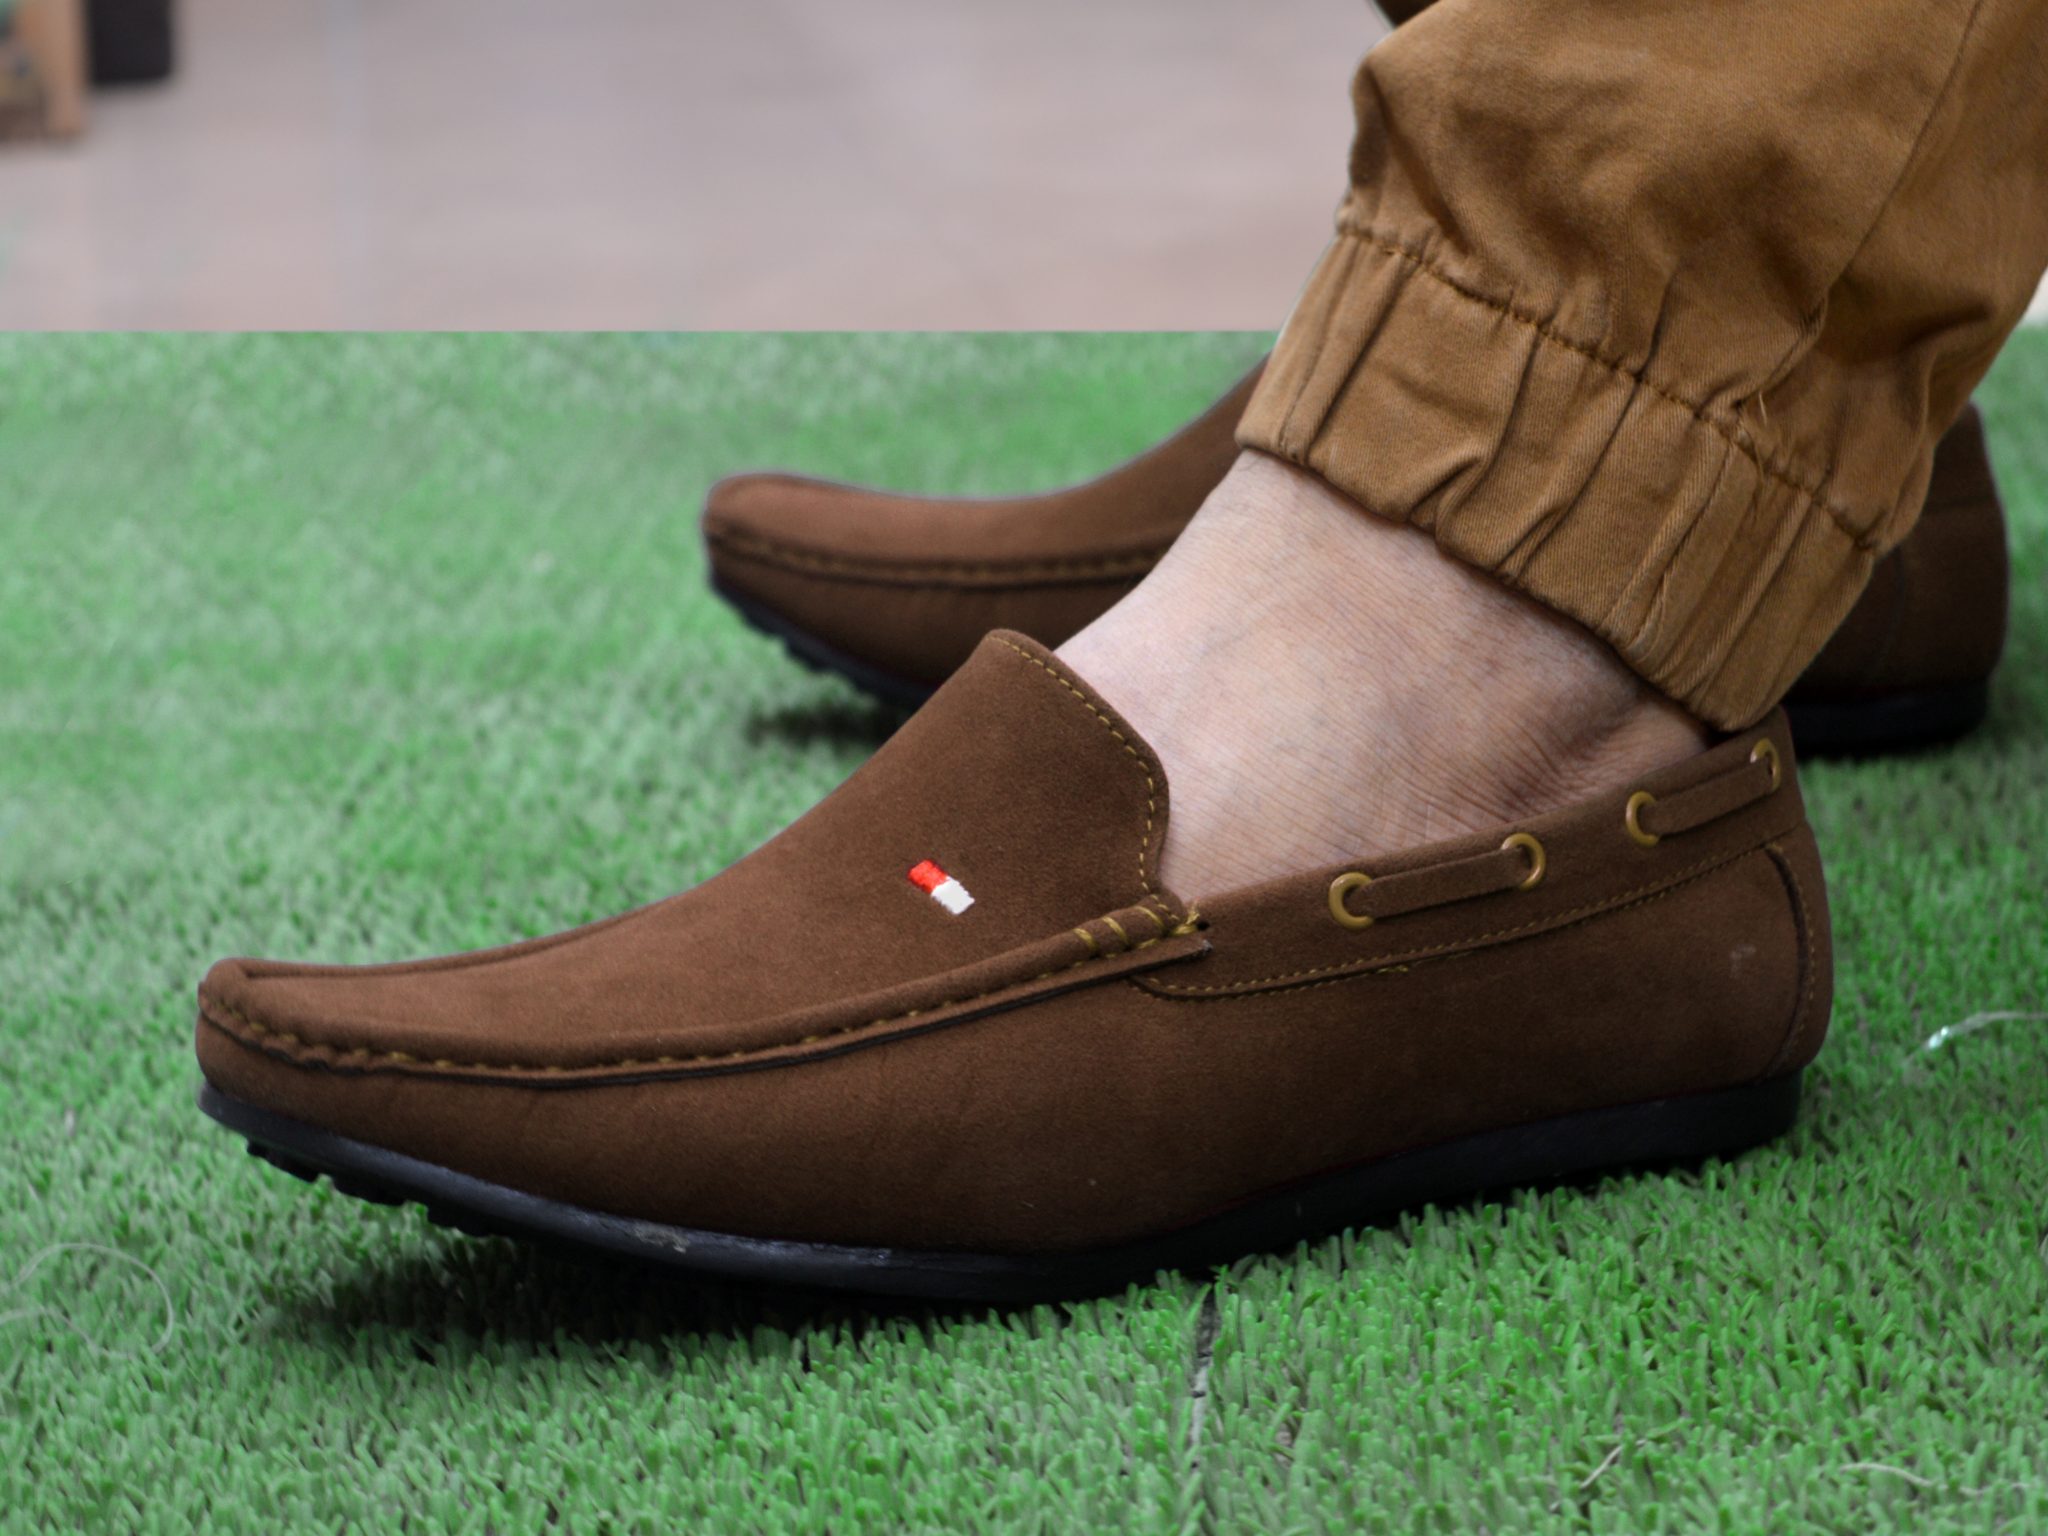 The 7 Different Loafer Styles, Explained - InsideHook